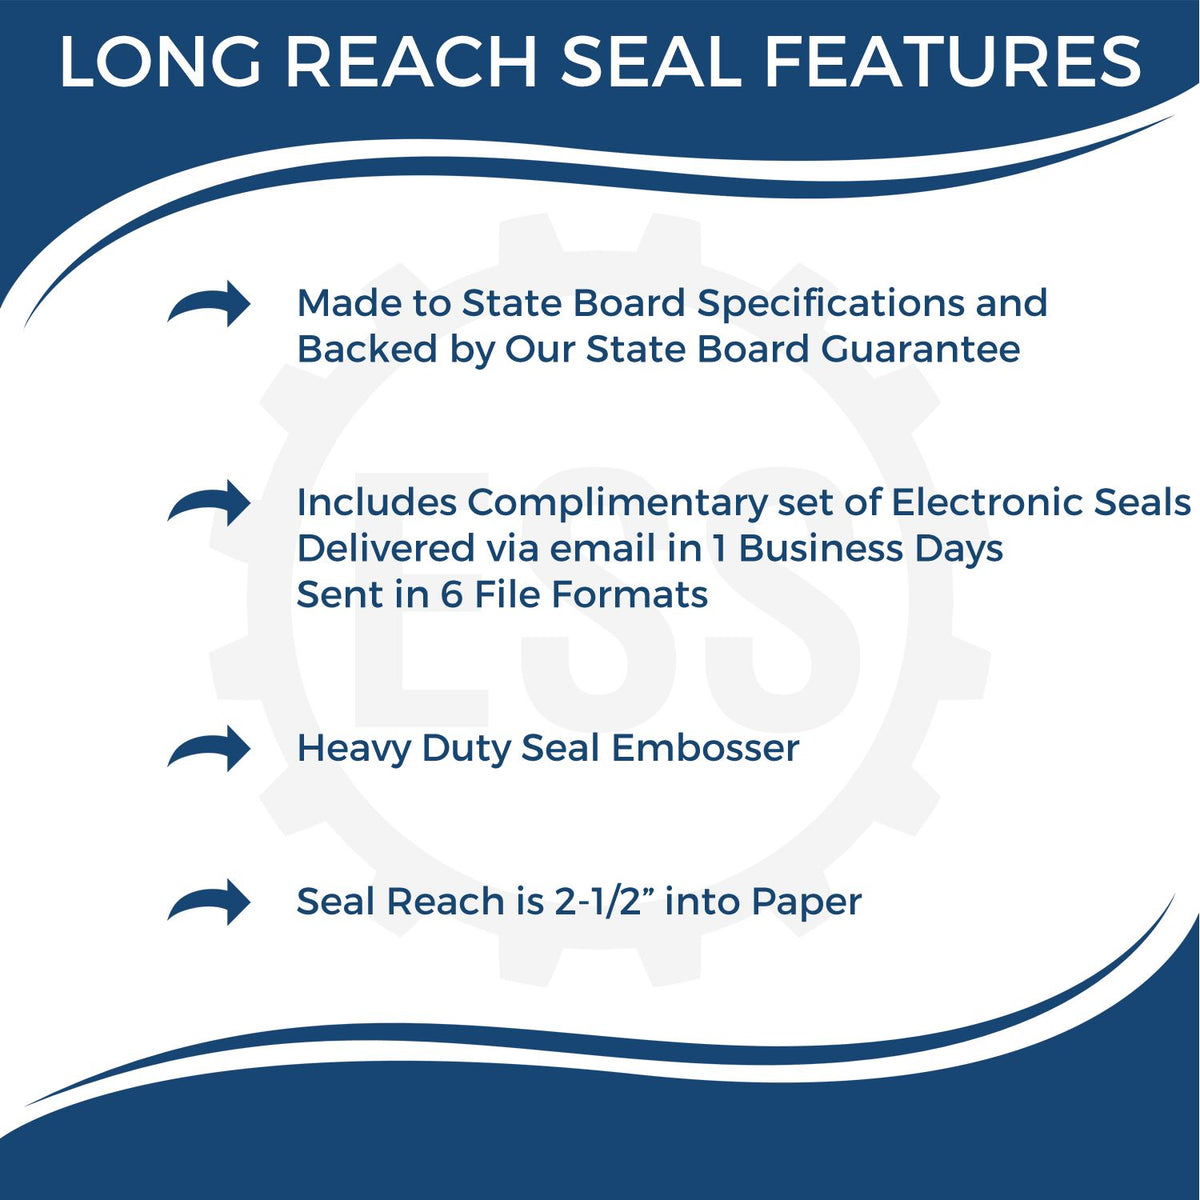 A picture of an infographic highlighting the selling points for the Long Reach Illinois PE Seal